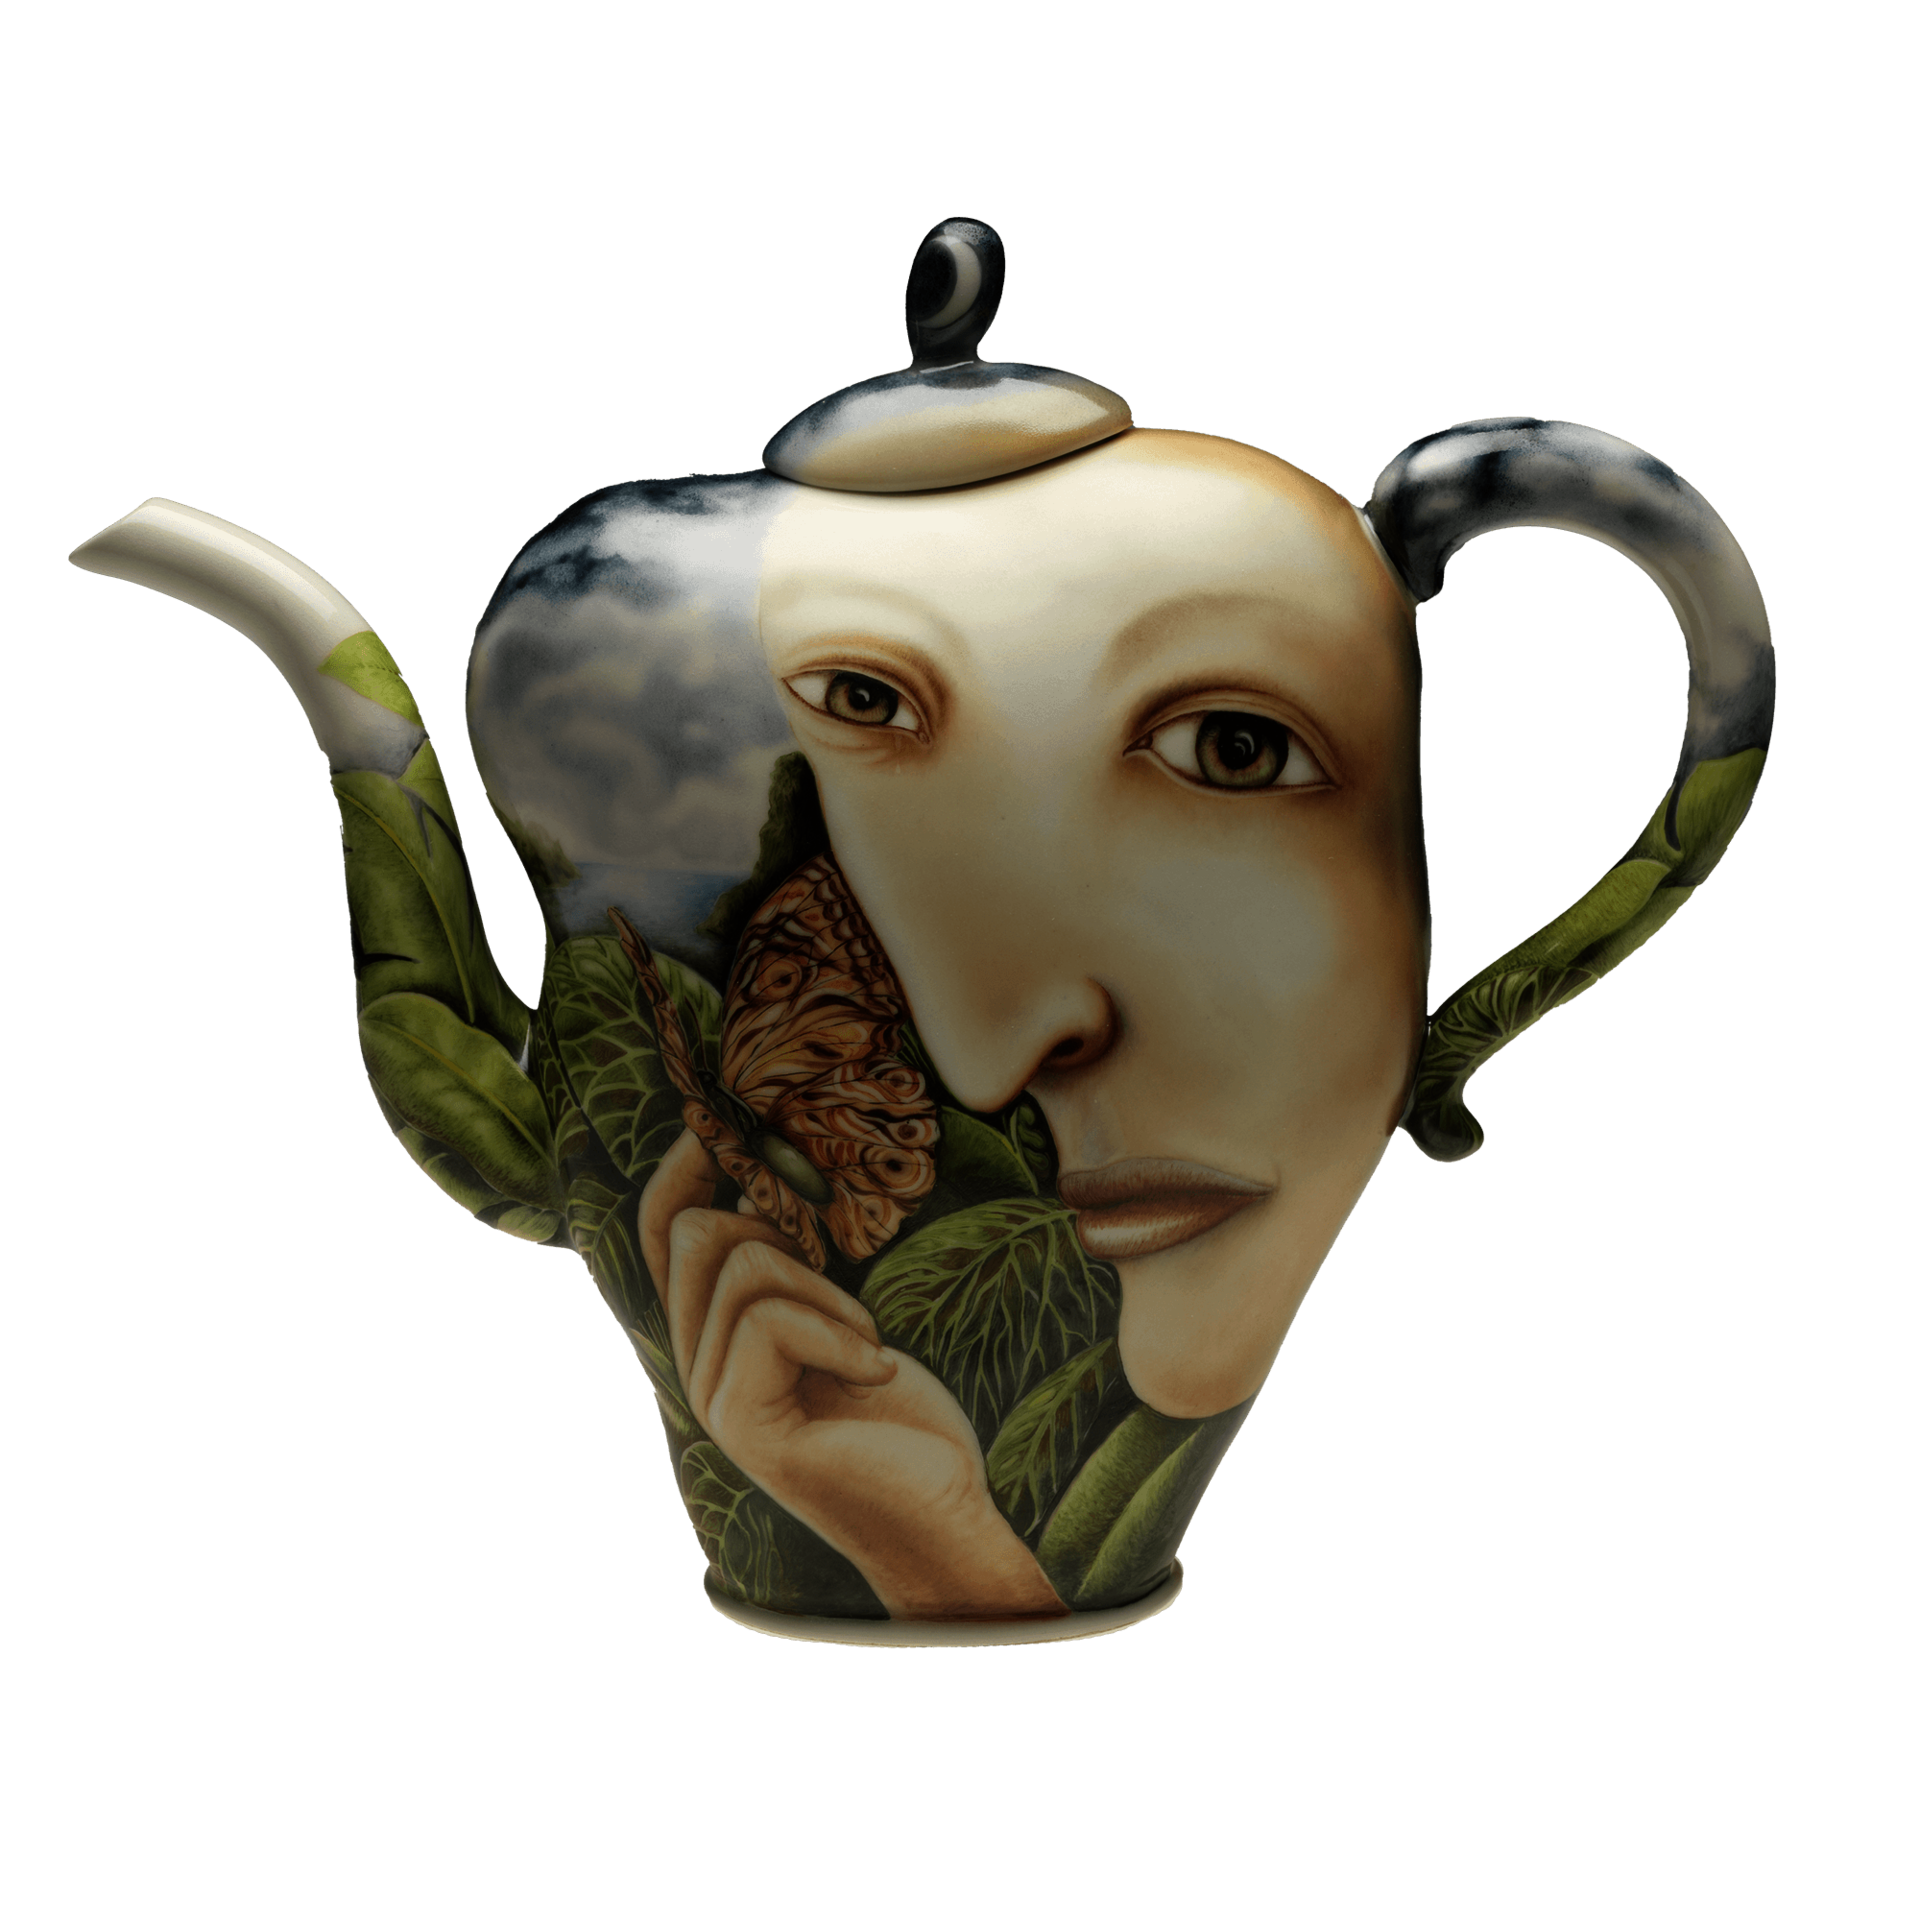 Porcelain teapot with a cubist-style painting of a person holding a butterfly decorating the exterior